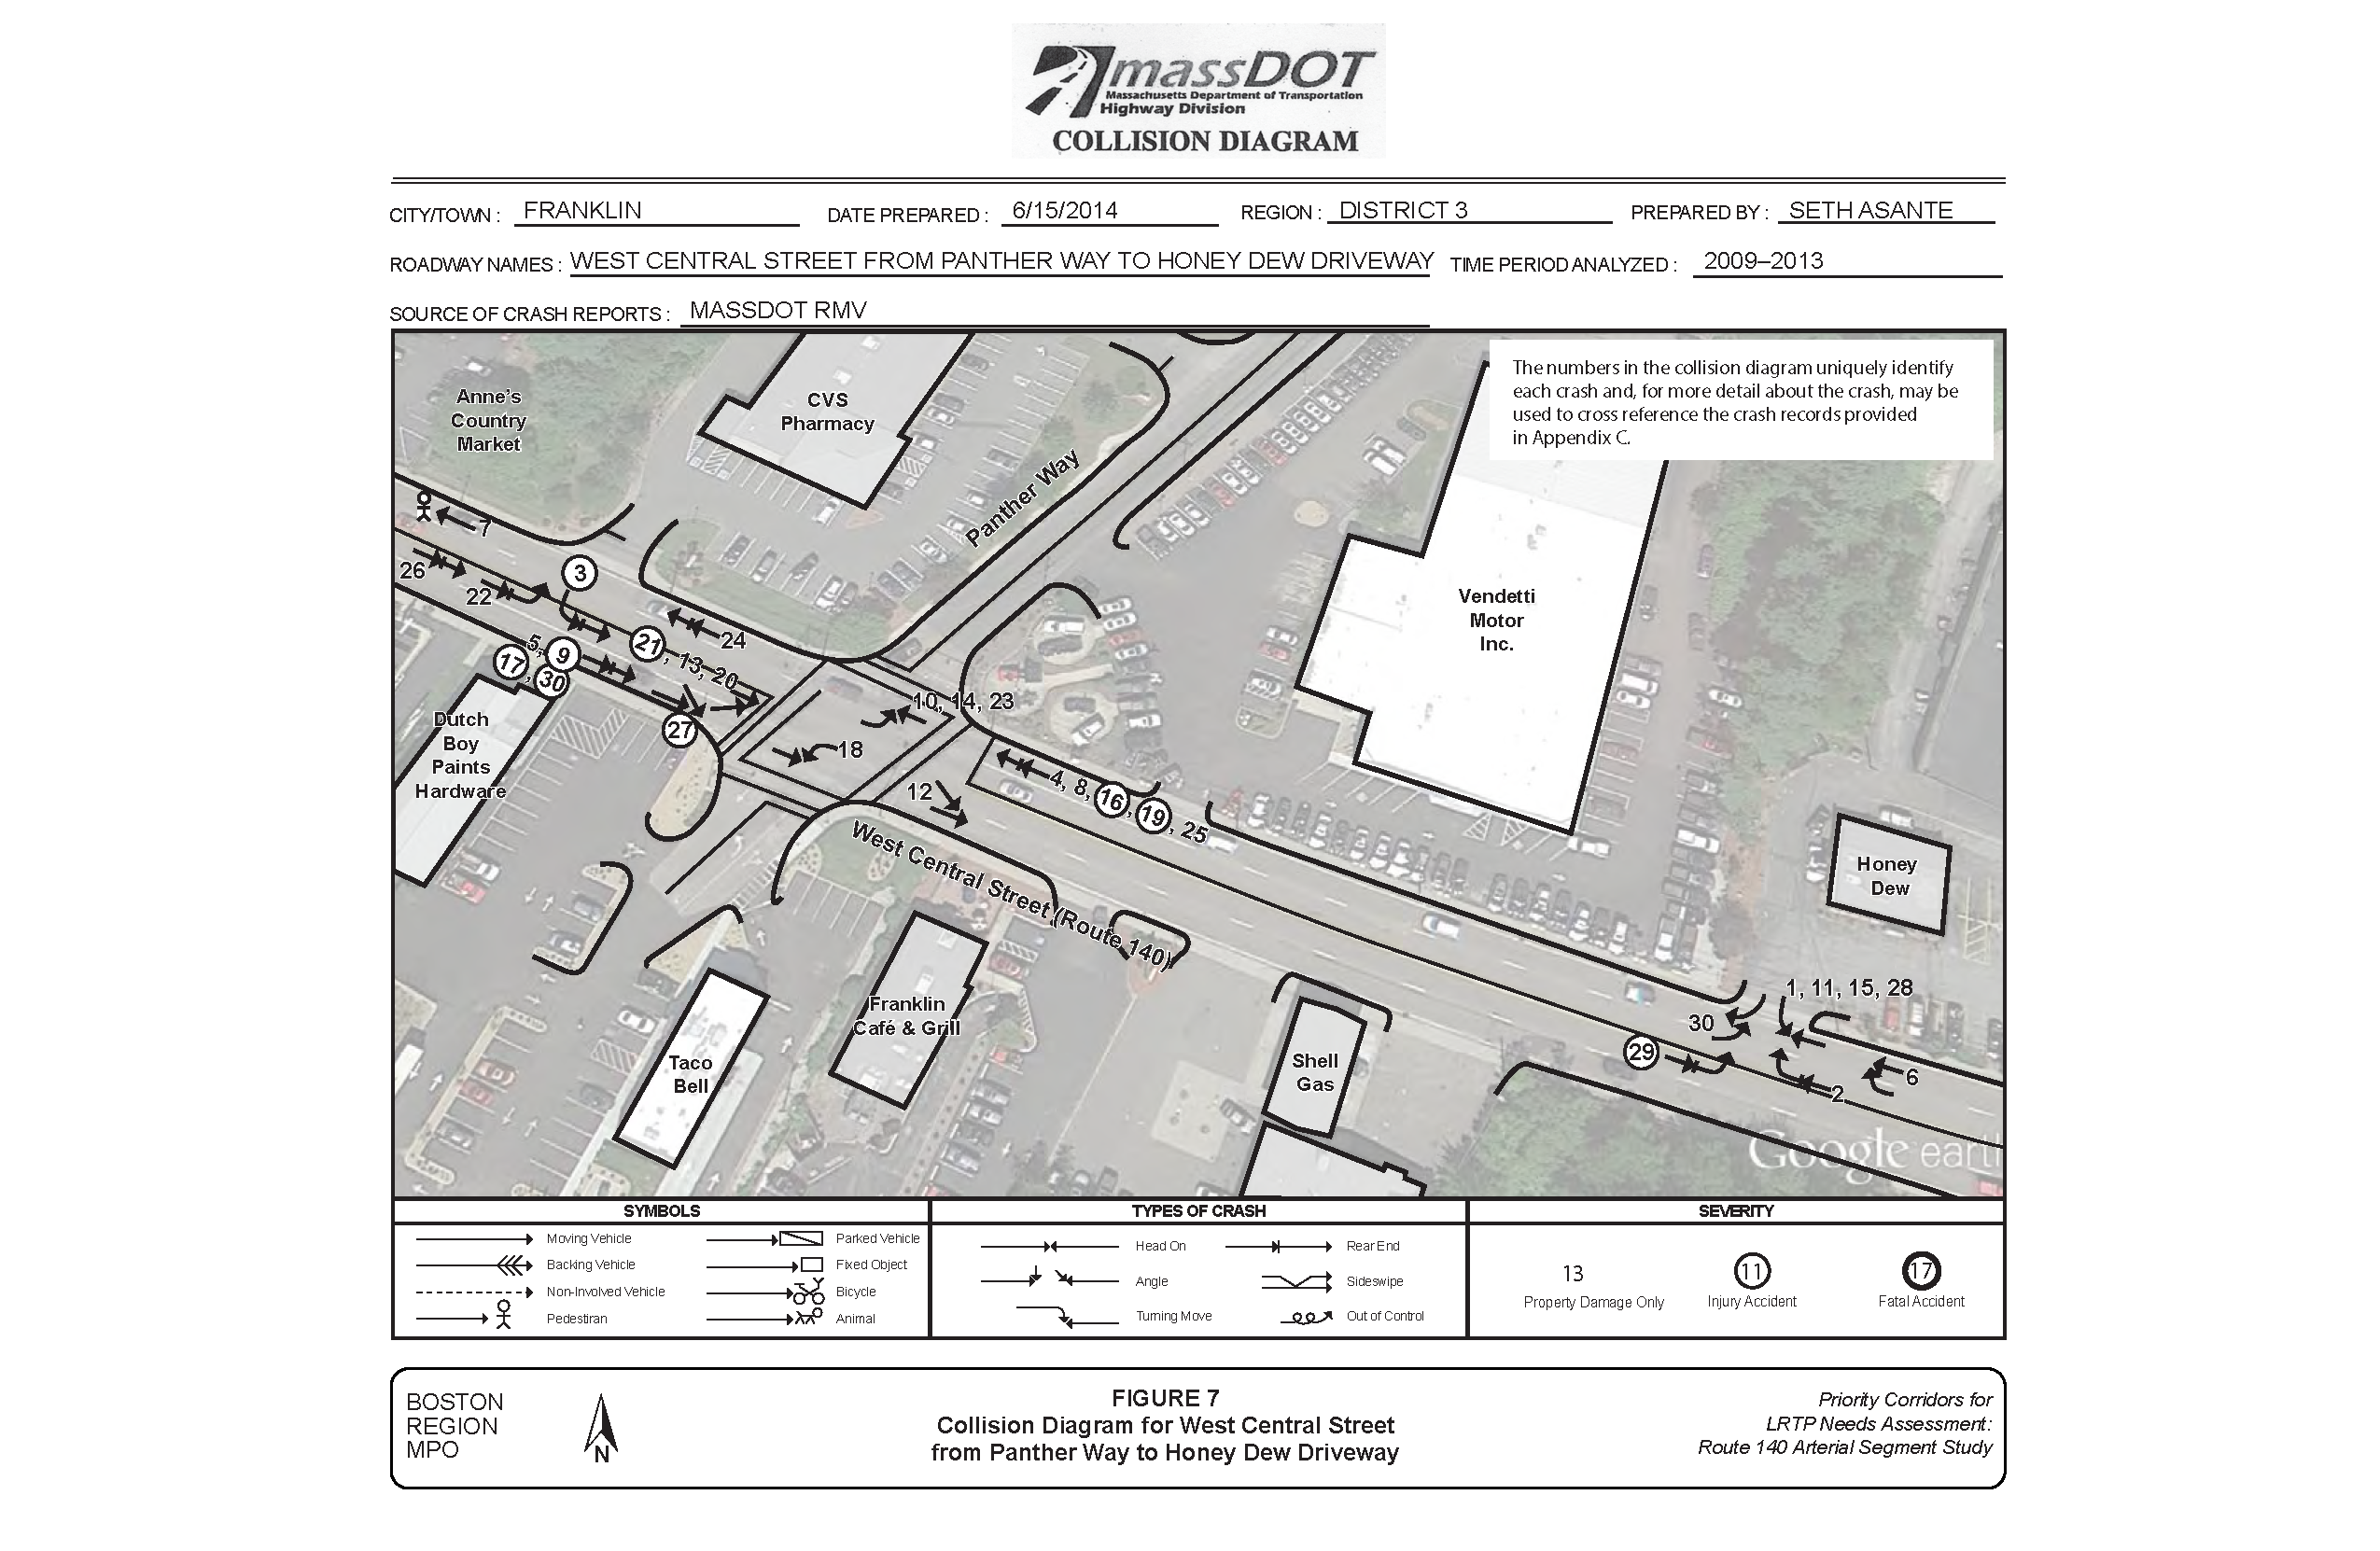 FIGURE 7: Collision Diagram for West Central Street from Panther Way to Honey Dew Driveway. Aerial-view map that shows location and type of crashes on West Central Street from Panther Way to Honey Dew Driveway between 2009 and 2013.